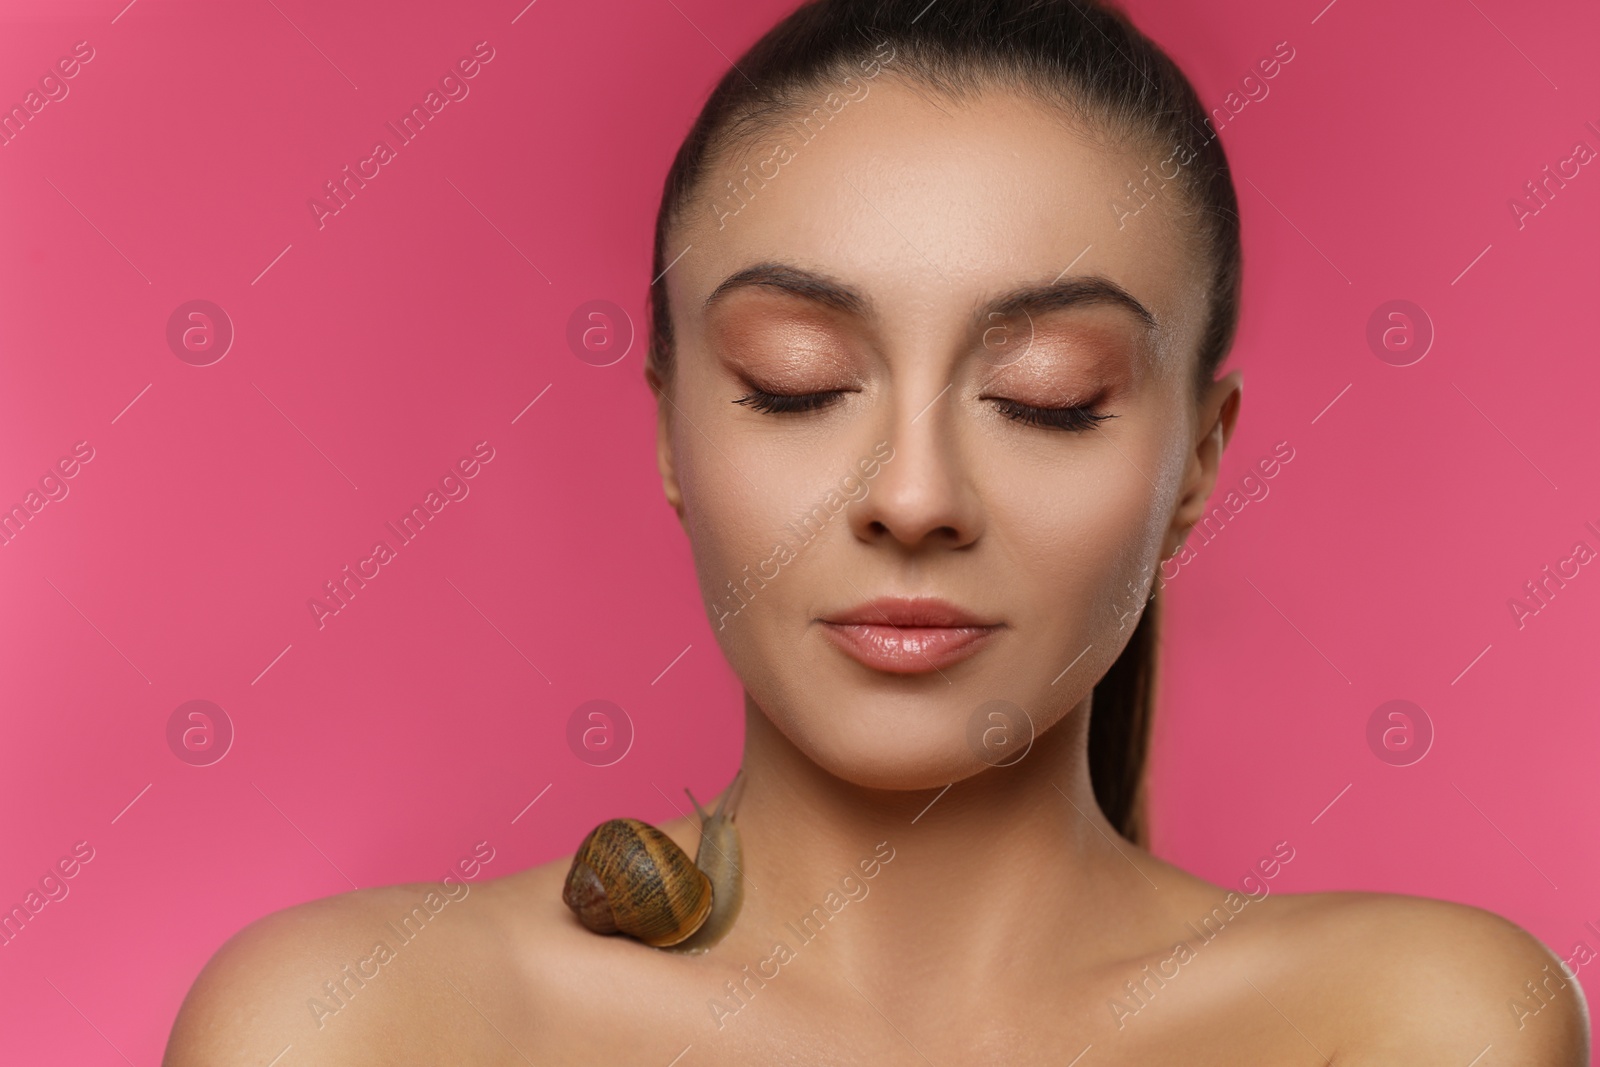 Photo of Beautiful young woman with snail on her body against pink background